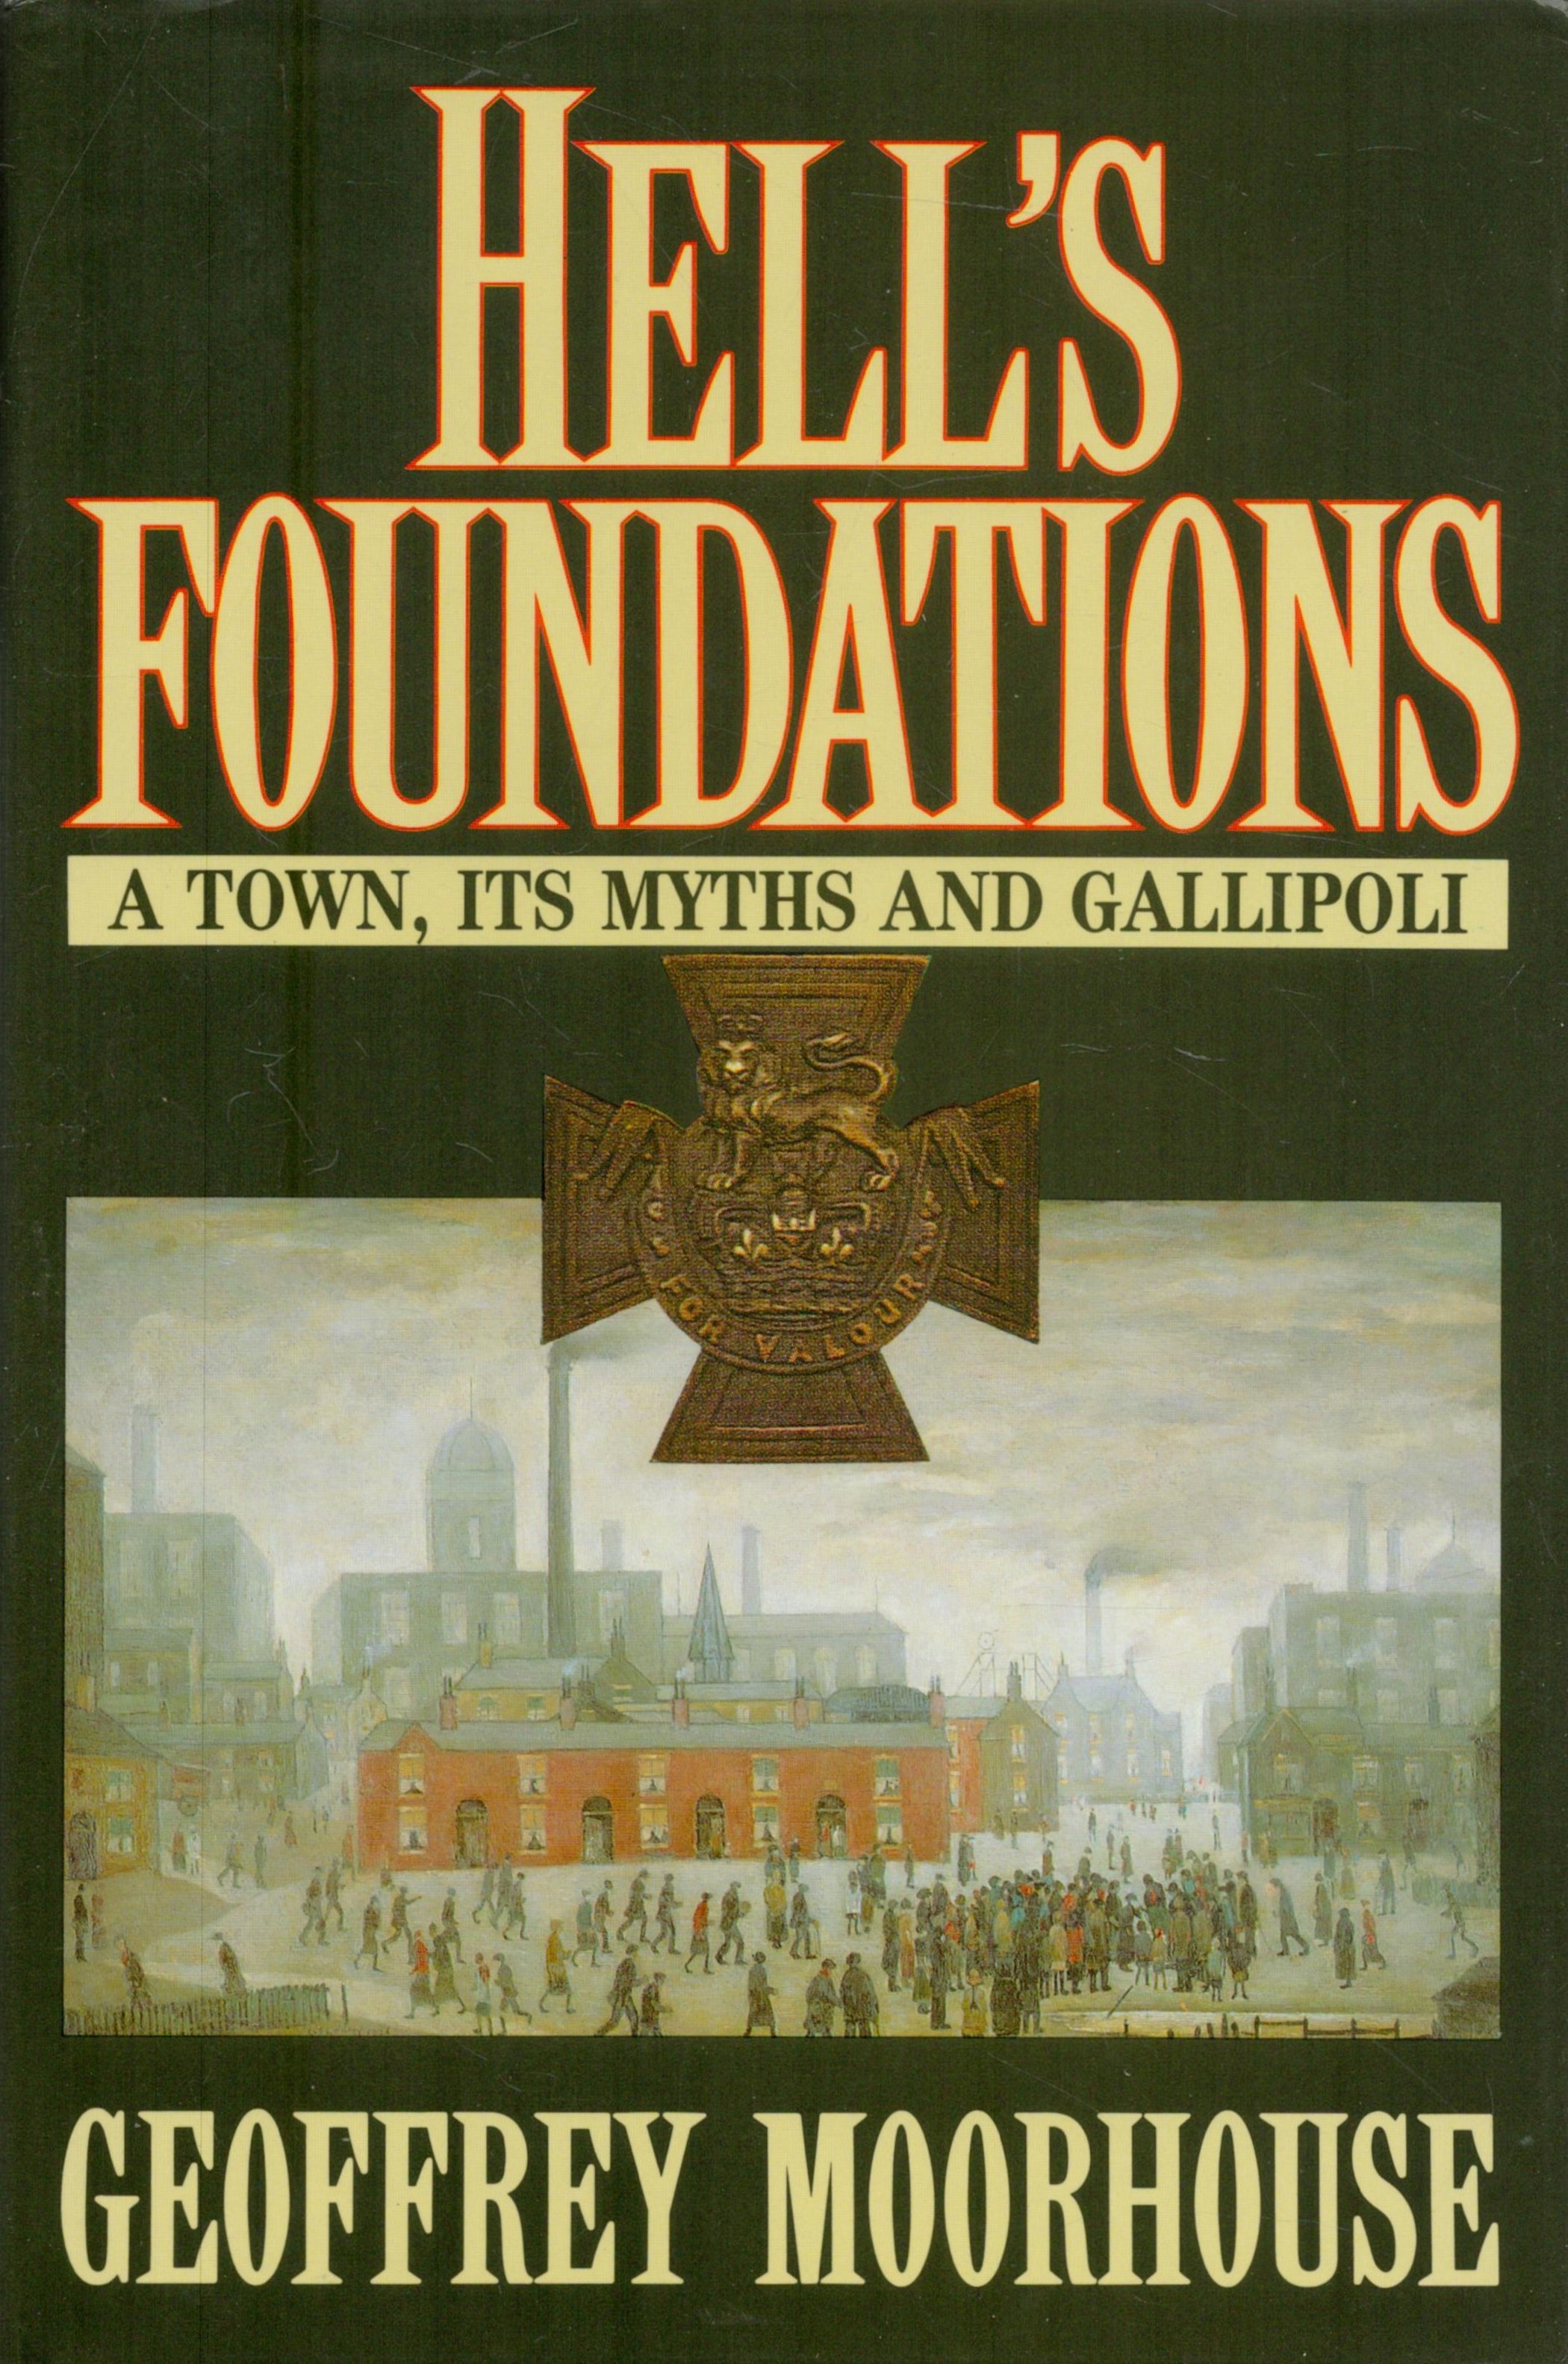 Hell's Foundations - A Town , Its Myths and Gallipoli by Geoffrey Moorhouse 1992 Hardback Book